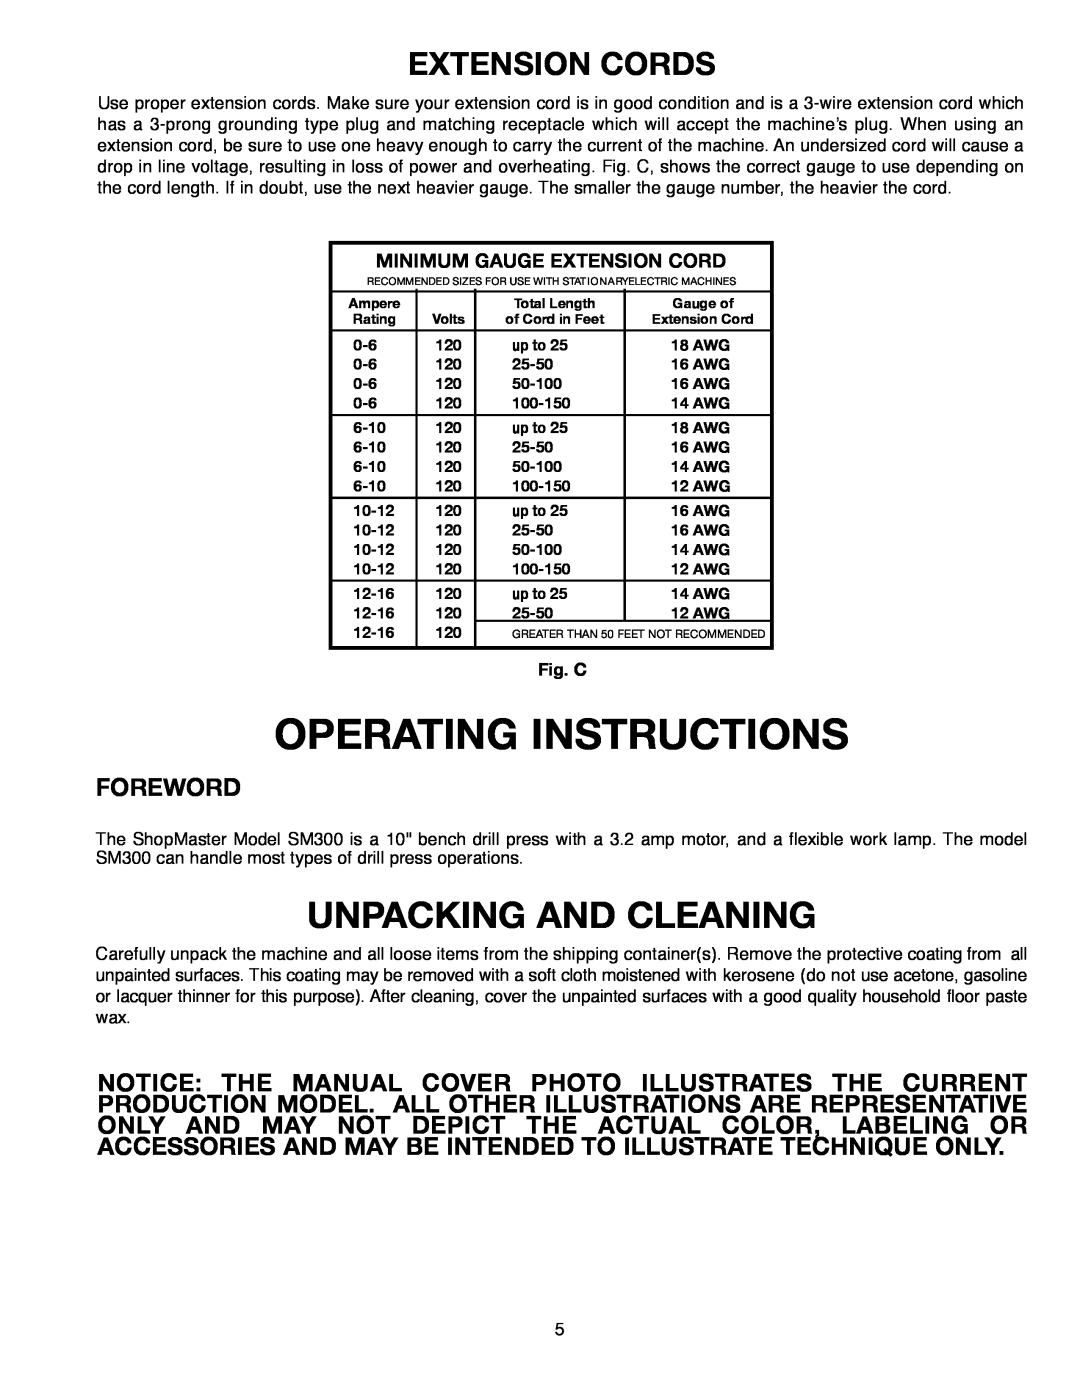 Delta 638517-00, SM300 O P E R Ating Instructions, U N Packing And Cleaning, Extension Cords, F O R E W O R D, Fig. C 